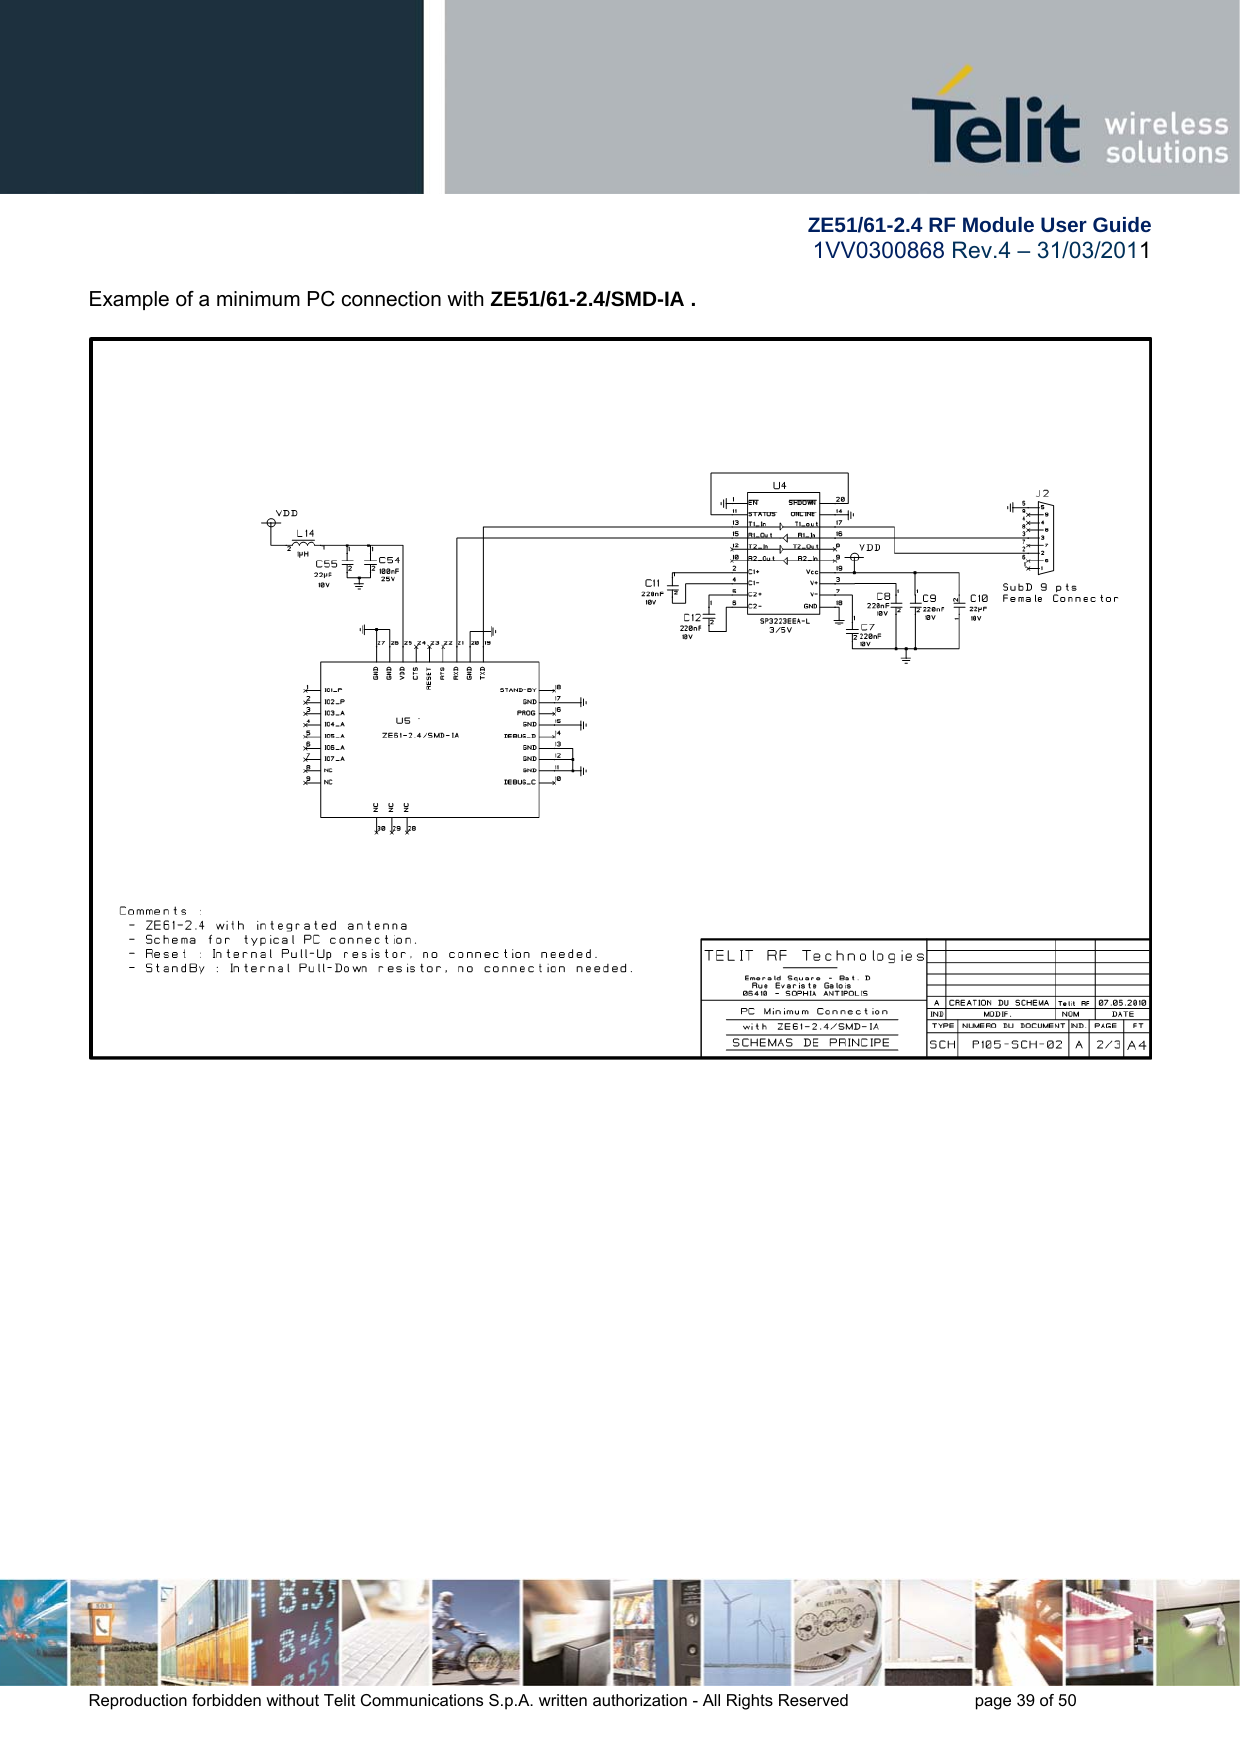        ZE51/61-2.4 RF Module User Guide 1VV0300868 Rev.4 – 31/03/2011 Reproduction forbidden without Telit Communications S.p.A. written authorization - All Rights Reserved    page 39 of 50  Example of a minimum PC connection with ZE51/61-2.4/SMD-IA .    